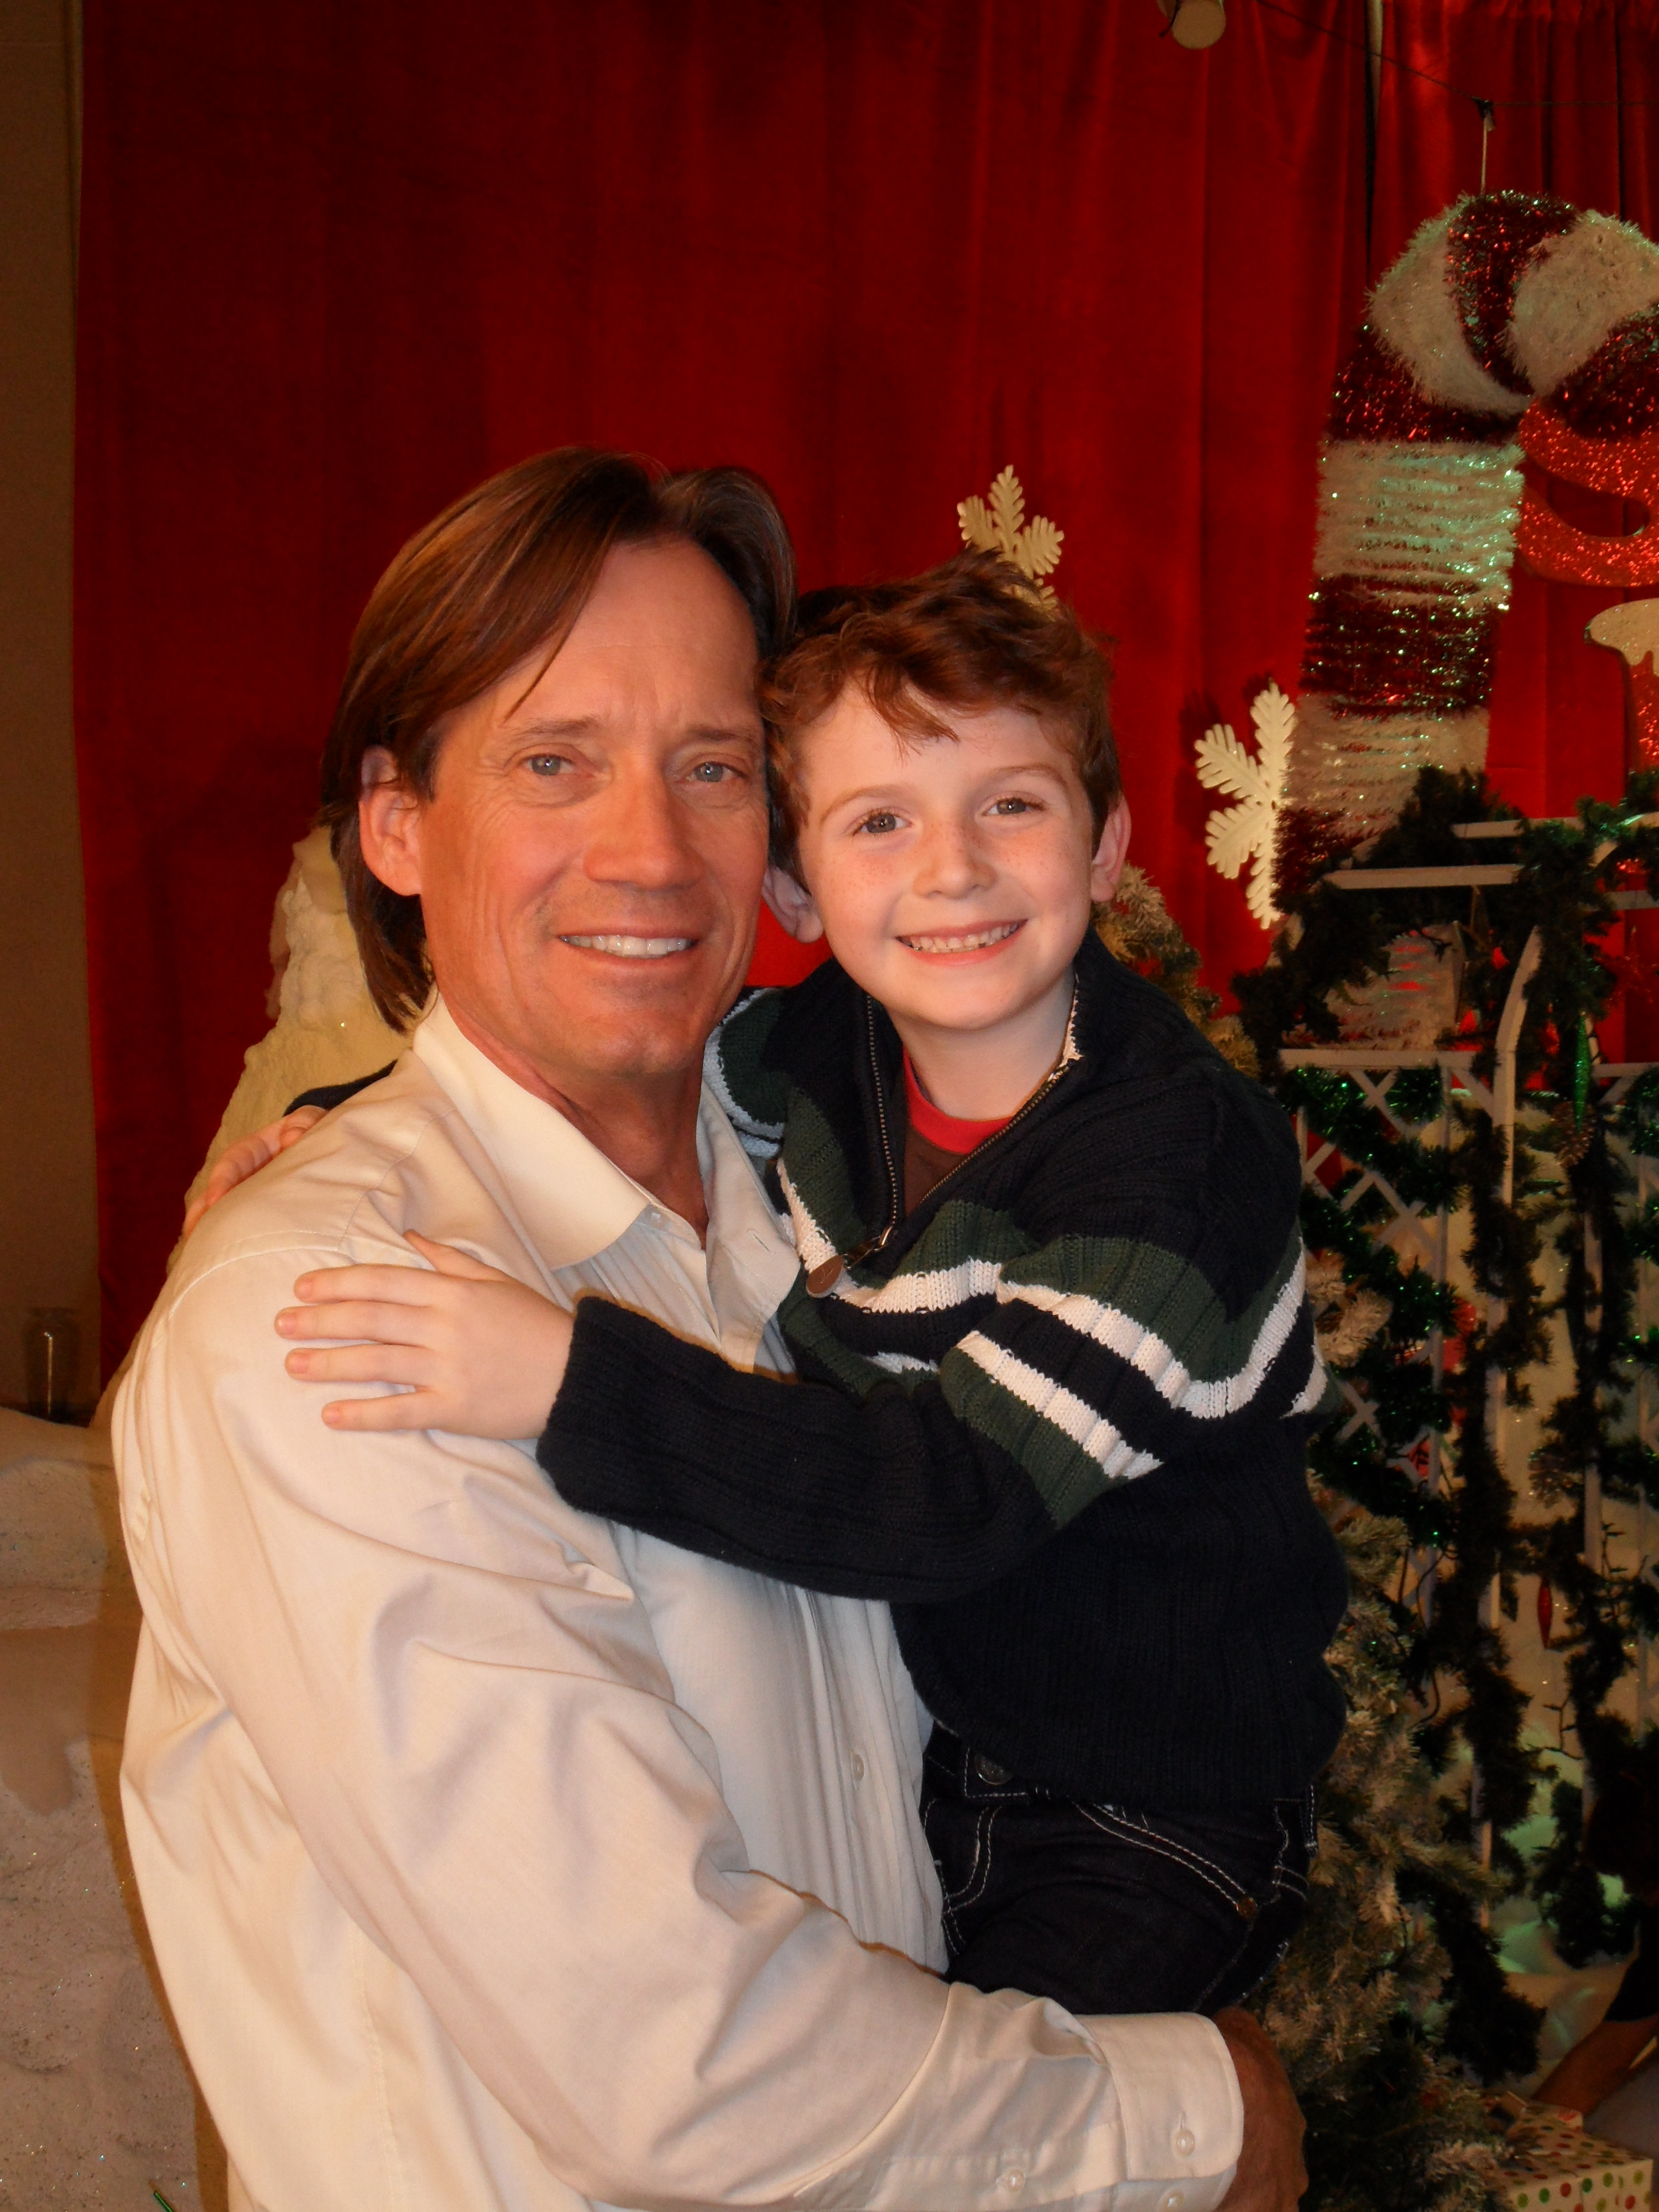 Santa Suit (TV movie) - on set with Kevin Sorbo (Hercules) Sept. 2010